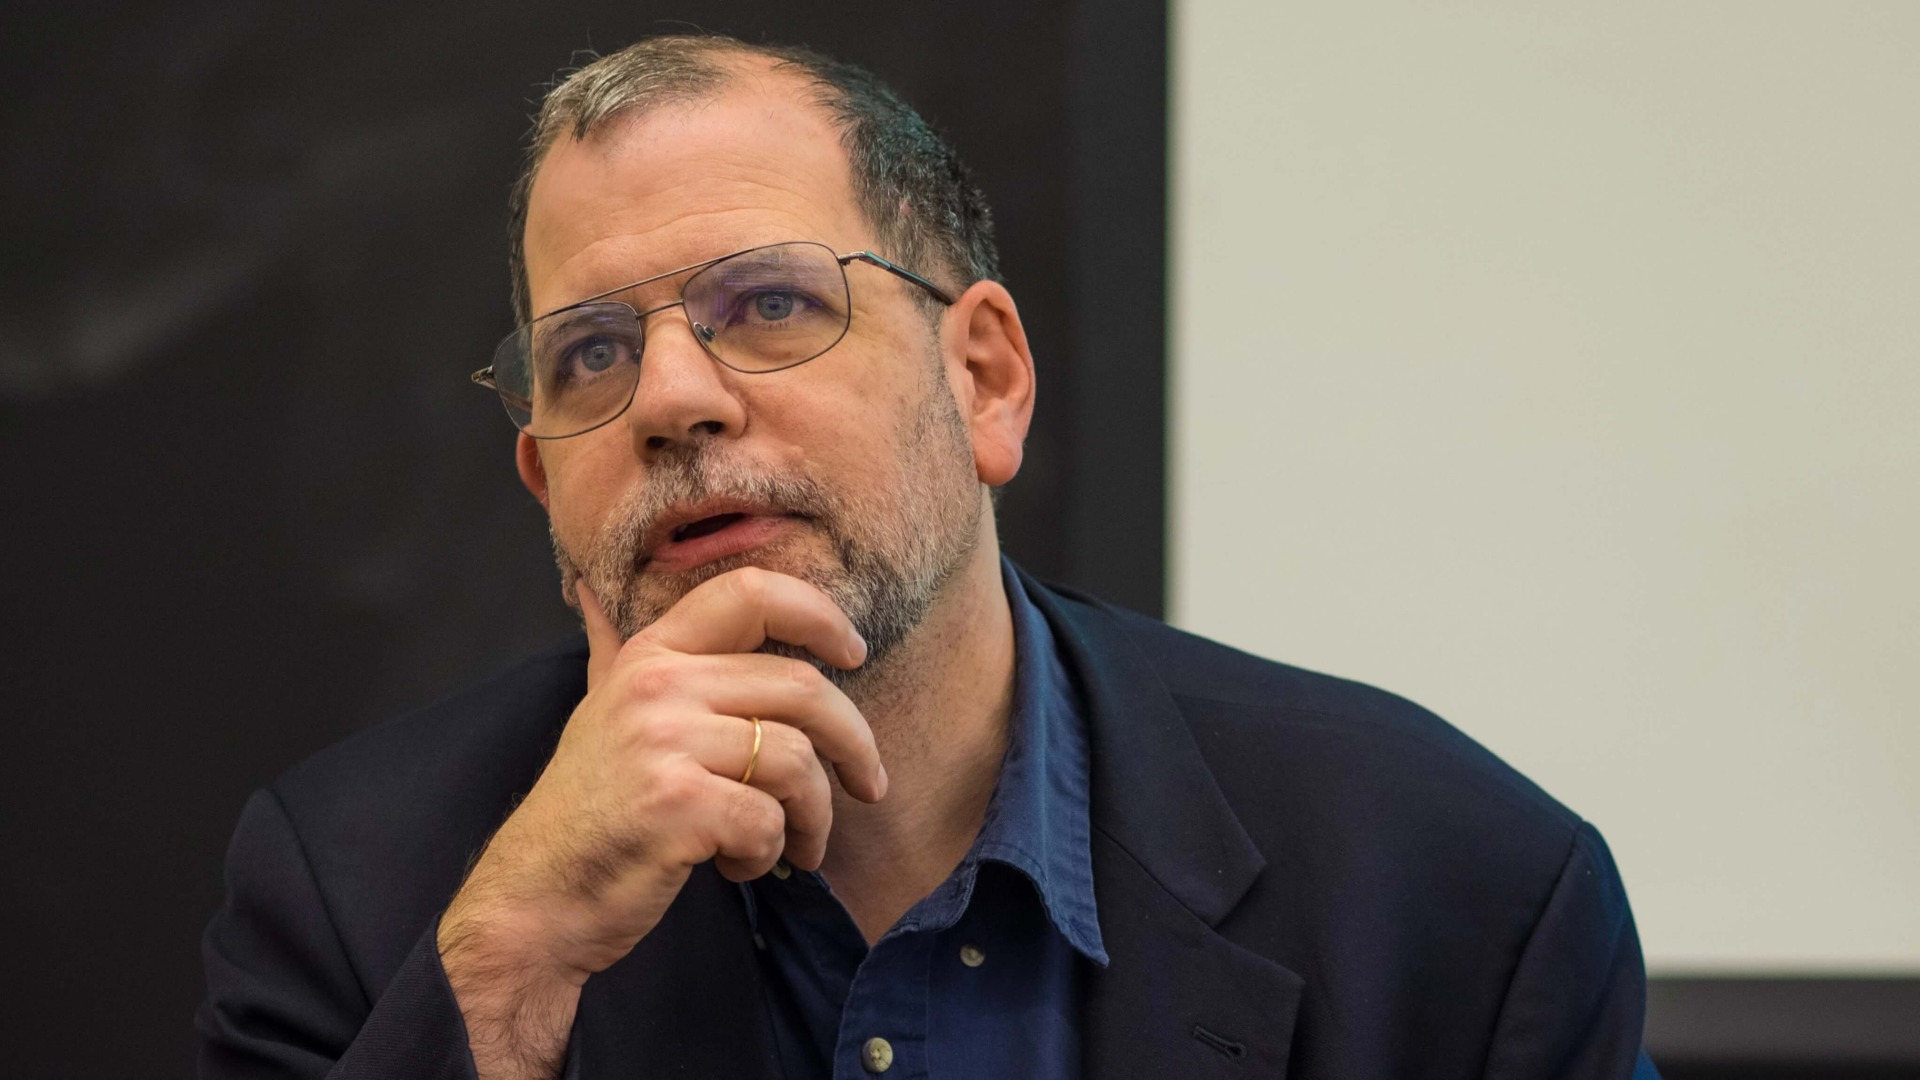 Interview with Tyler Cowen: Co-authorship, Causality, and More